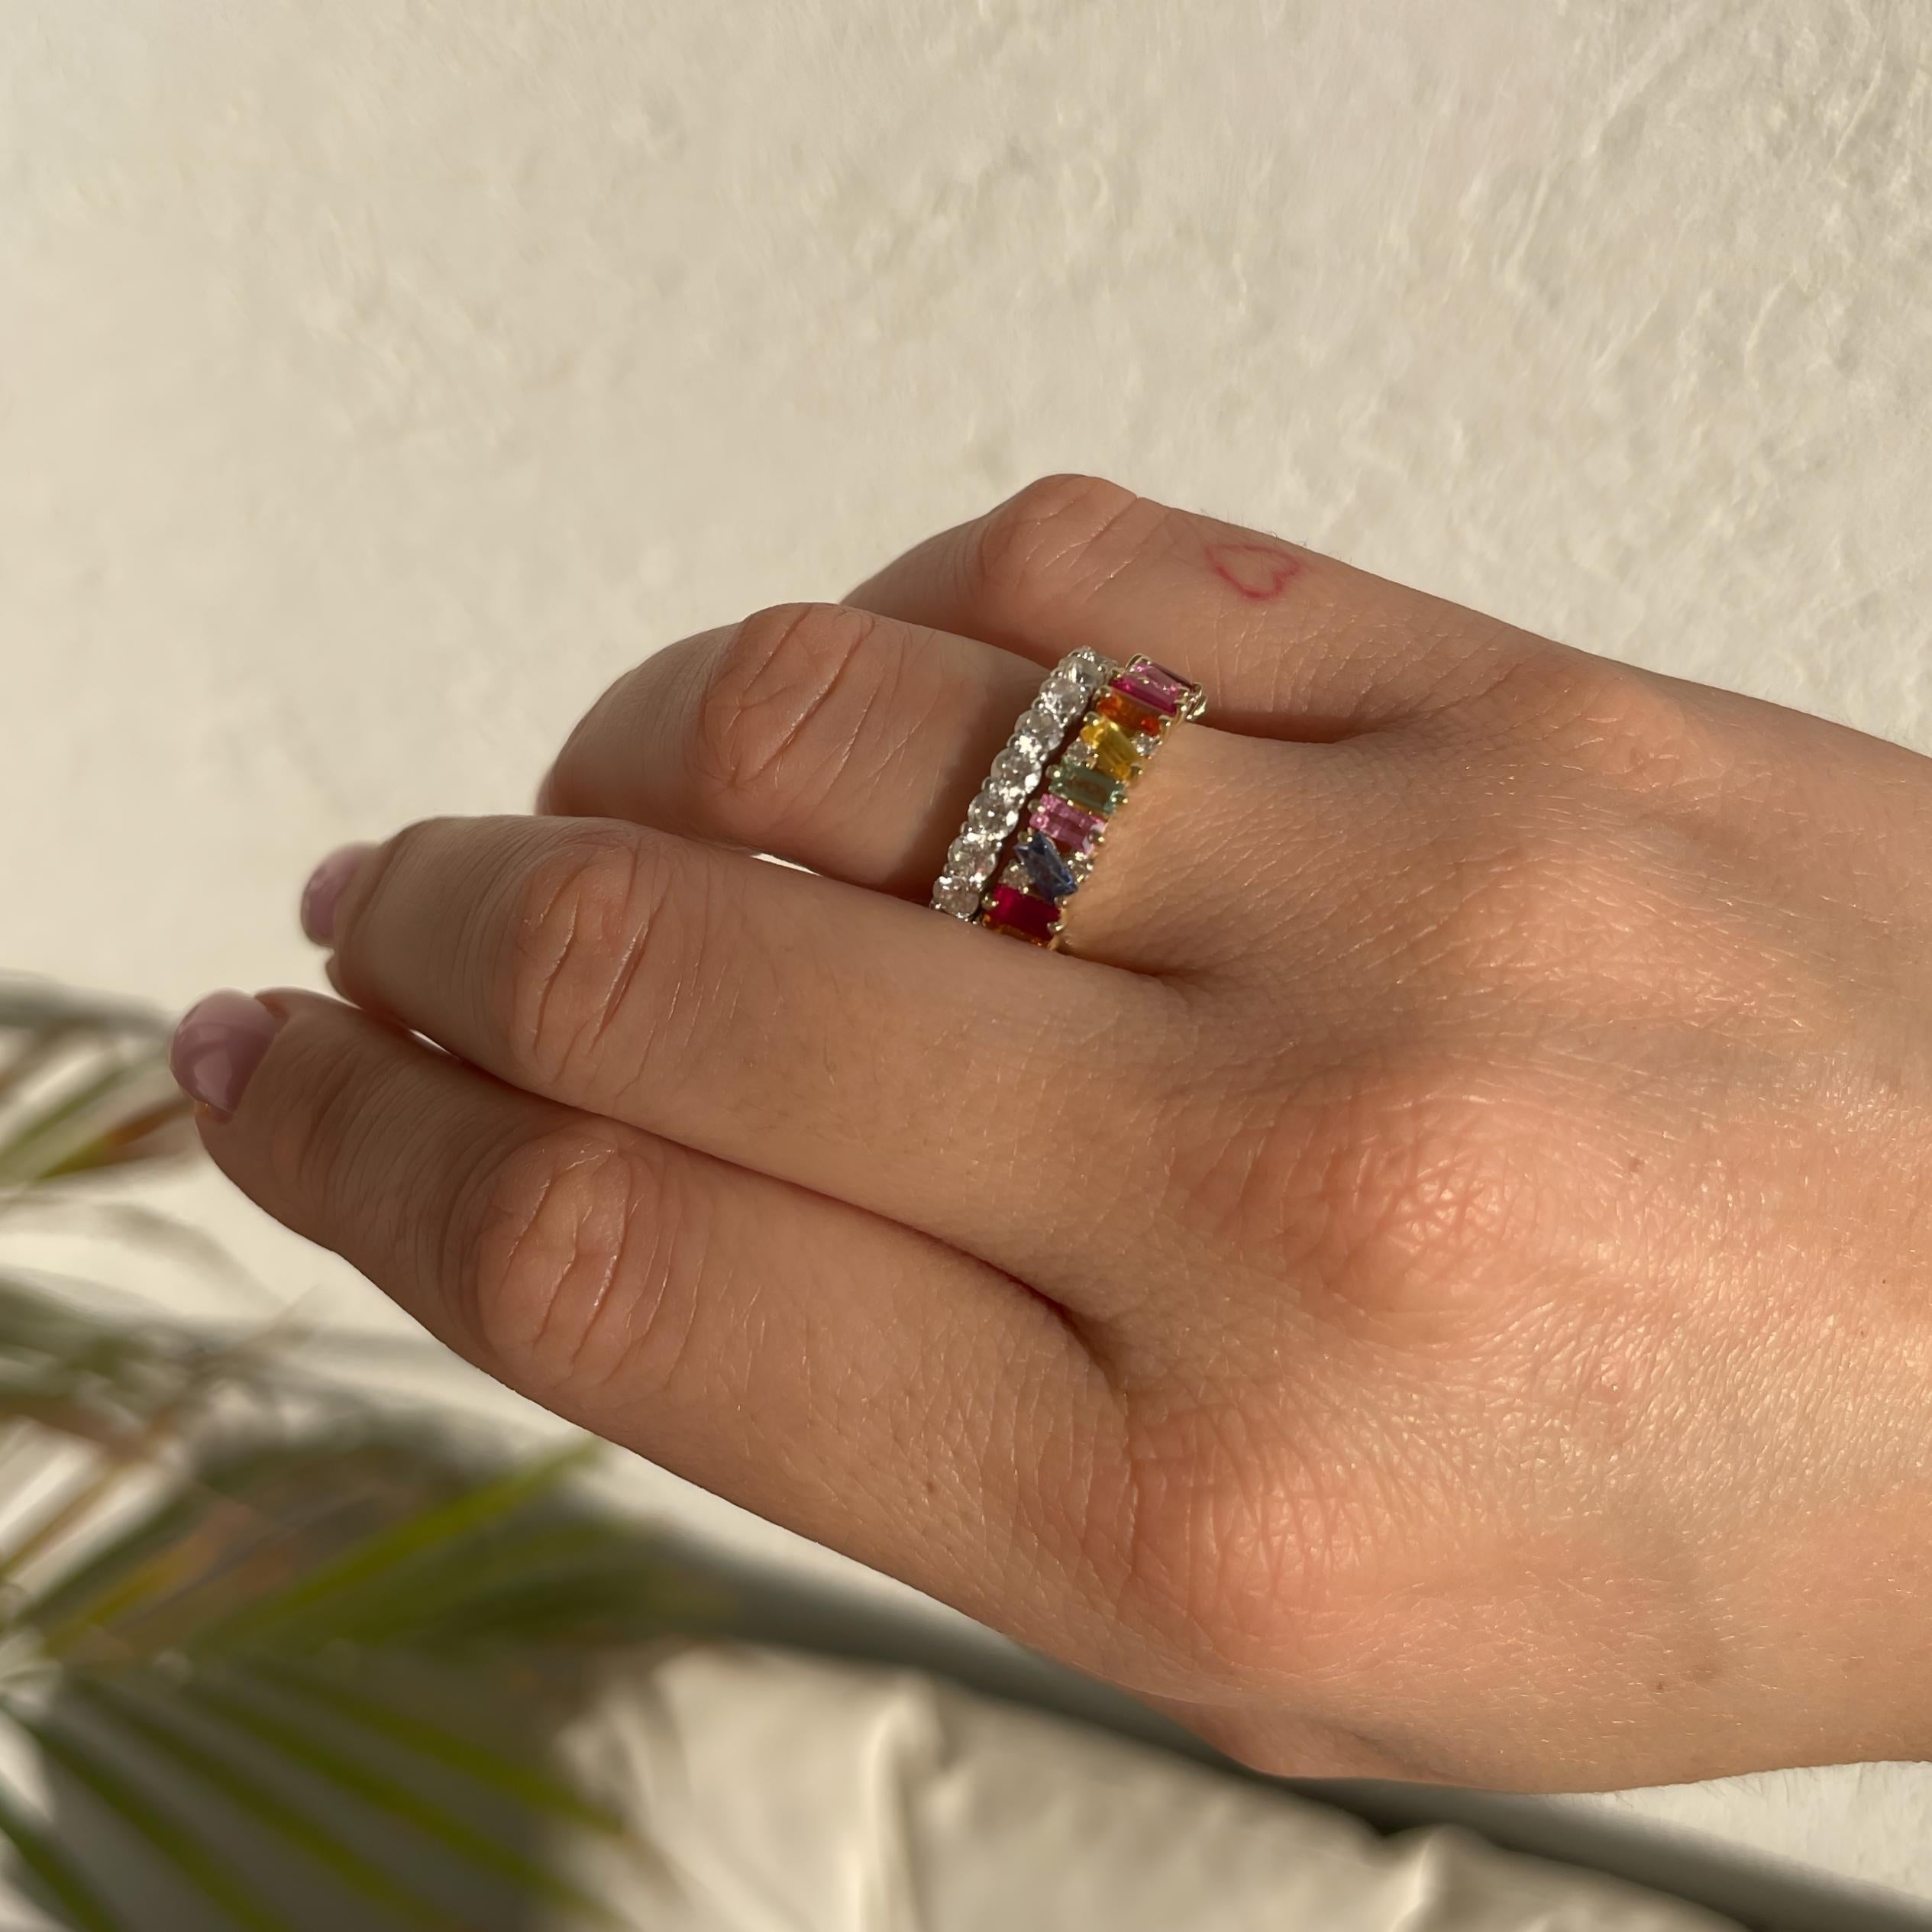 Rainbow Ring - Sophisticated 14K gold & Gems Masterpiece

Product Description:

Indulge in our Rainbow Ring, a statement piece meticulously crafted from high-grade 14K gold, featuring a radiant sapphires & diamonds at its heart.

Key